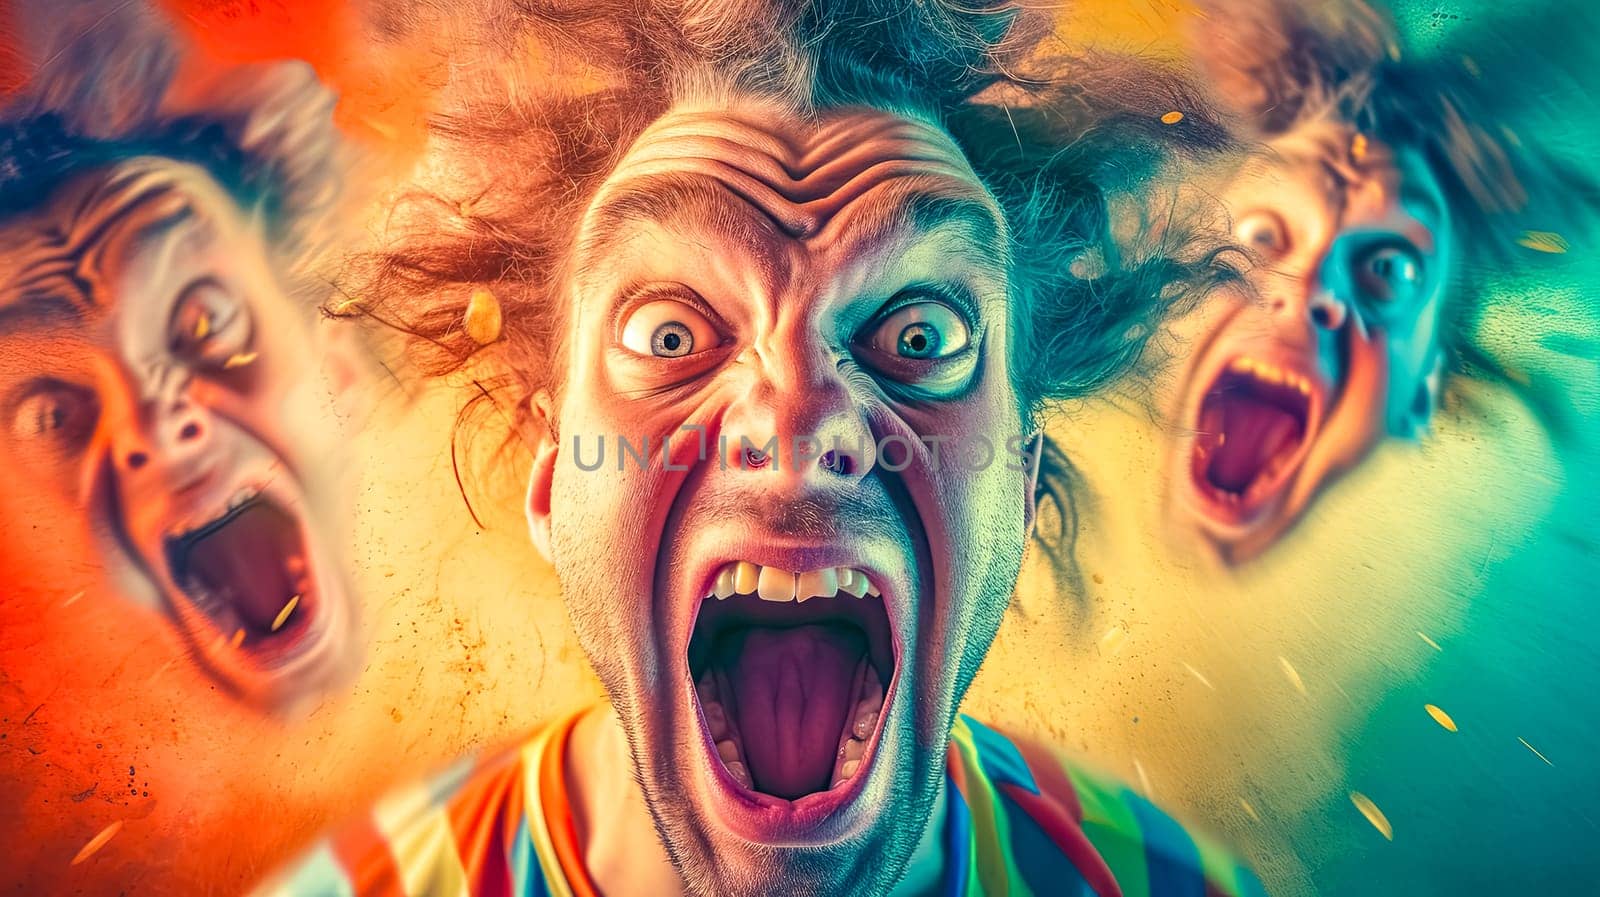 A surreal, colorful portrait of a person with exaggerated facial expressions, featuring multiple ghosted images conveying intense emotion, set against a vibrant, textured background by Edophoto